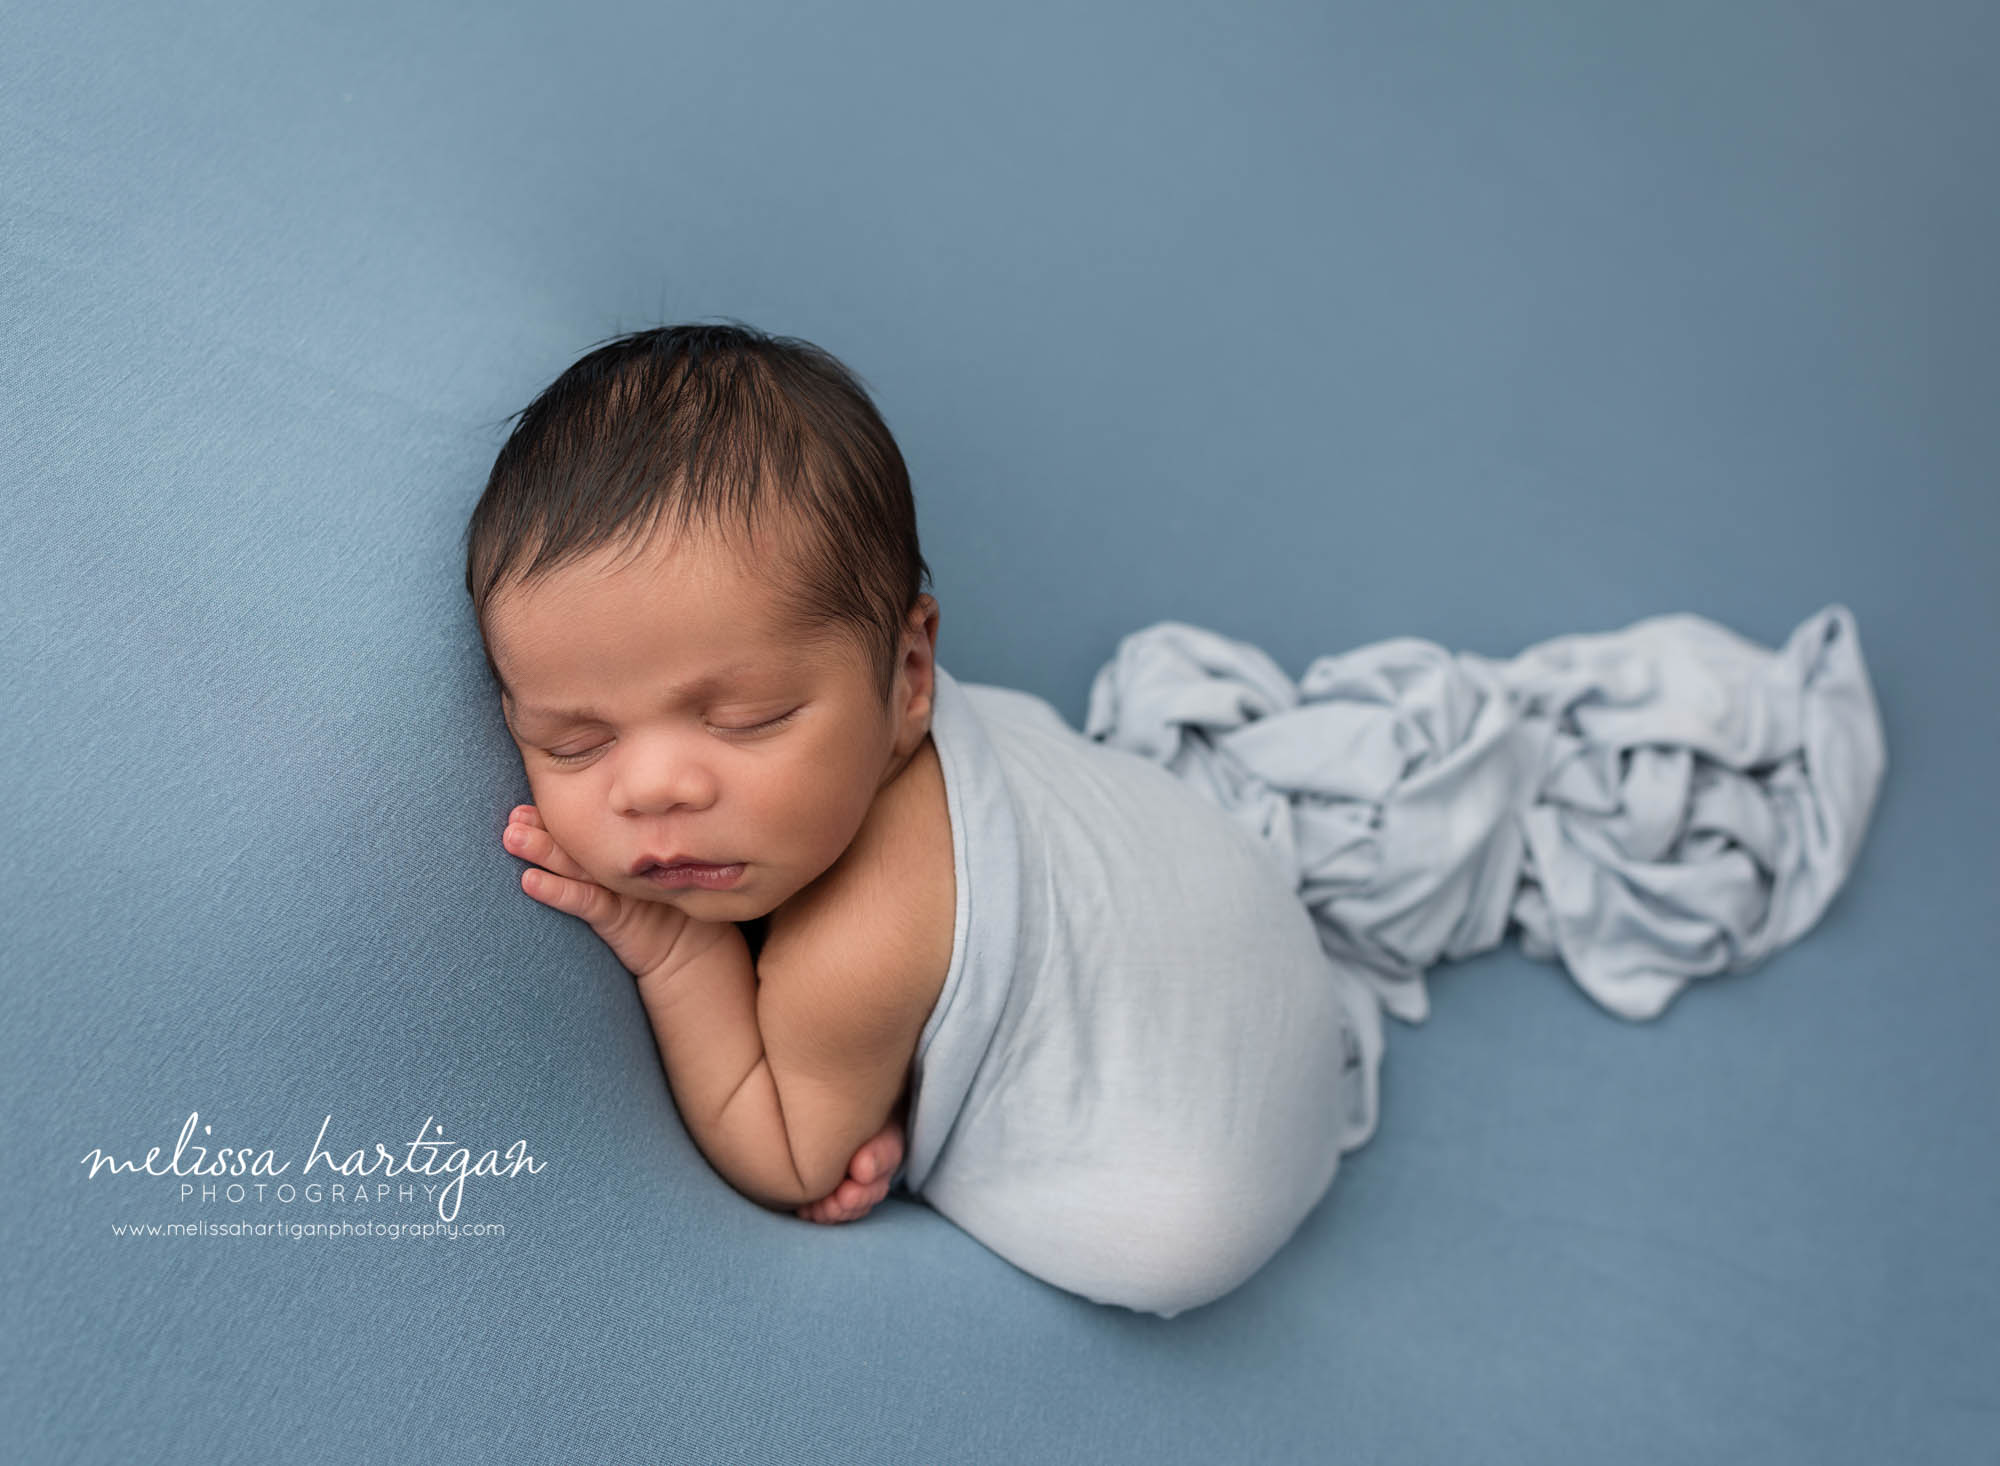 newborn baby boy posed on blue backdrop with light blue fabric draping over him